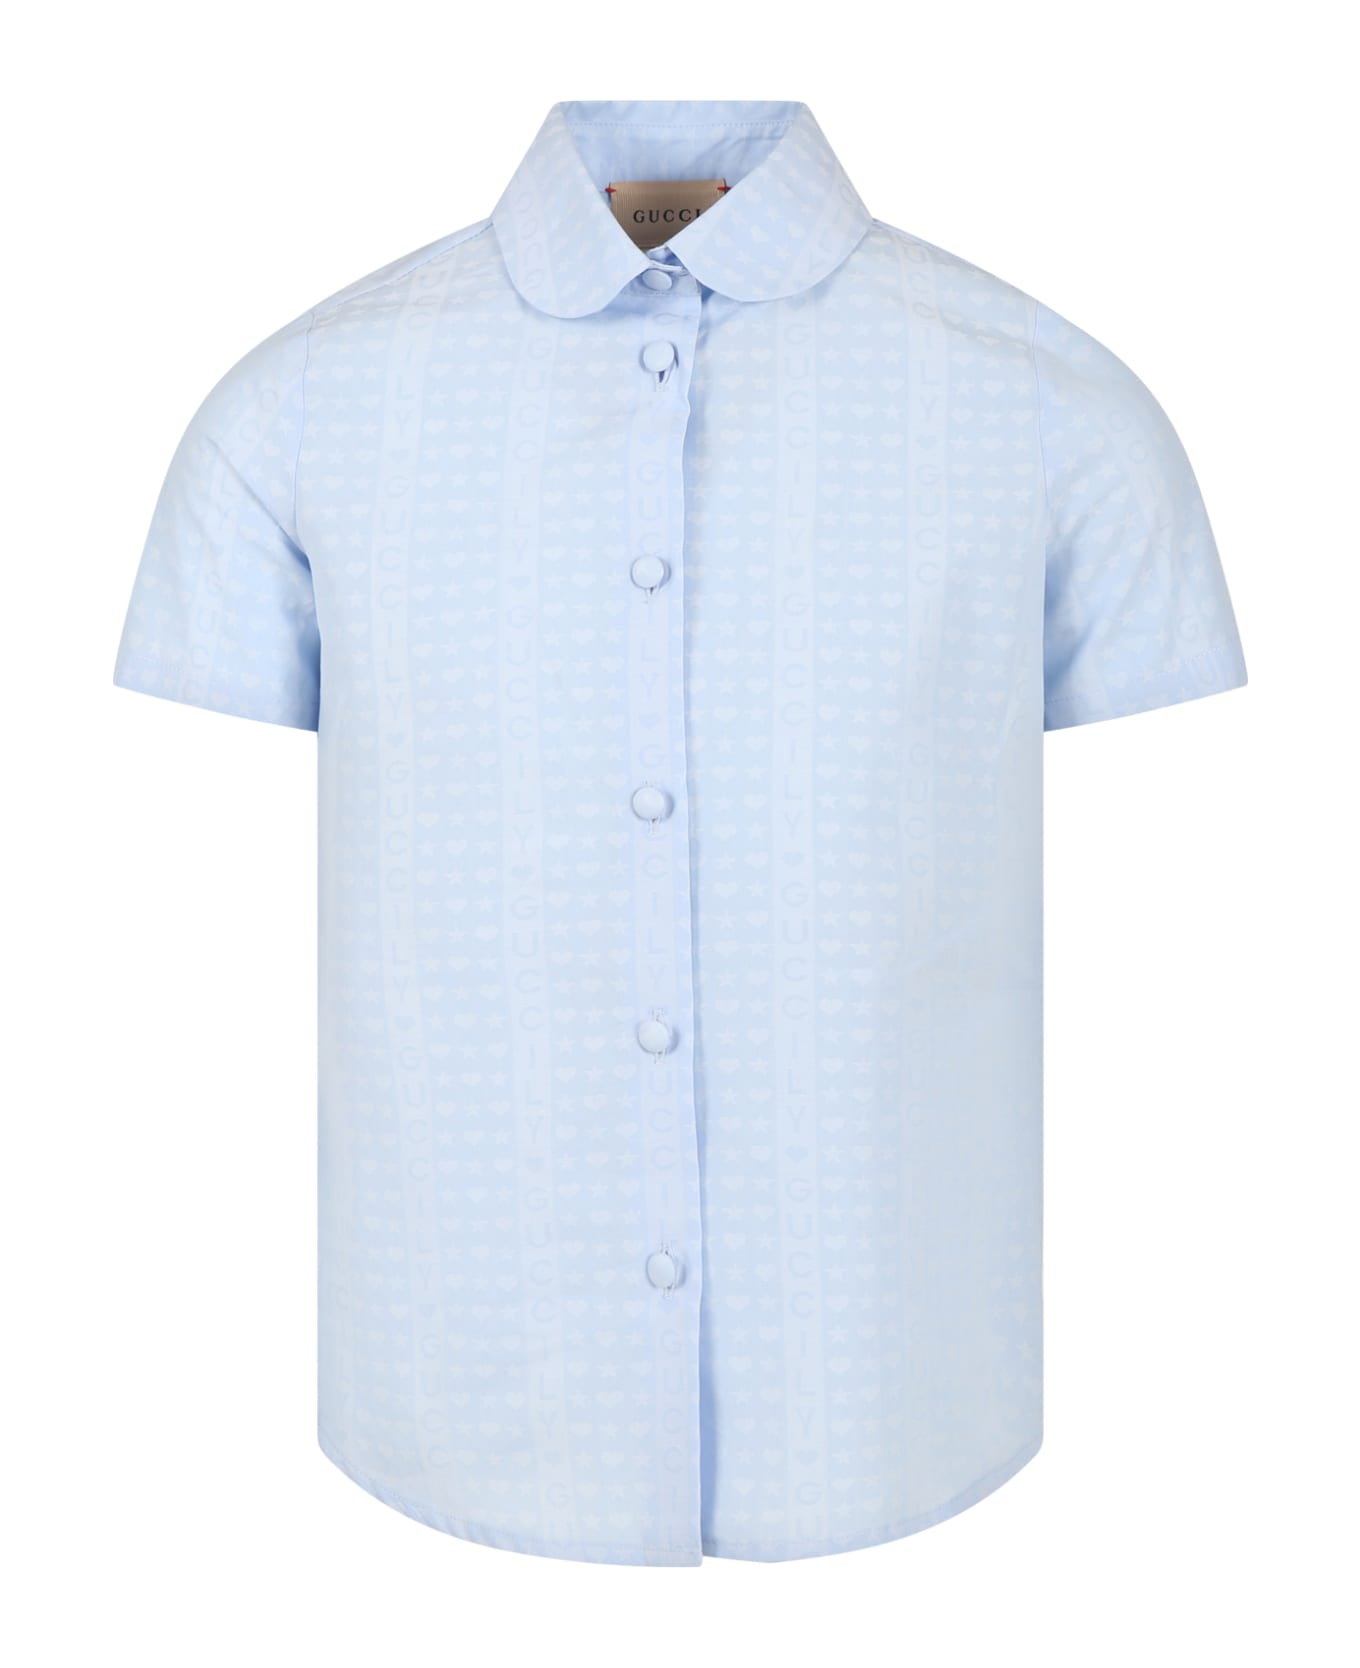 Gucci Light Blue Shirt For Girl With "guccily" Writing - Light Blue